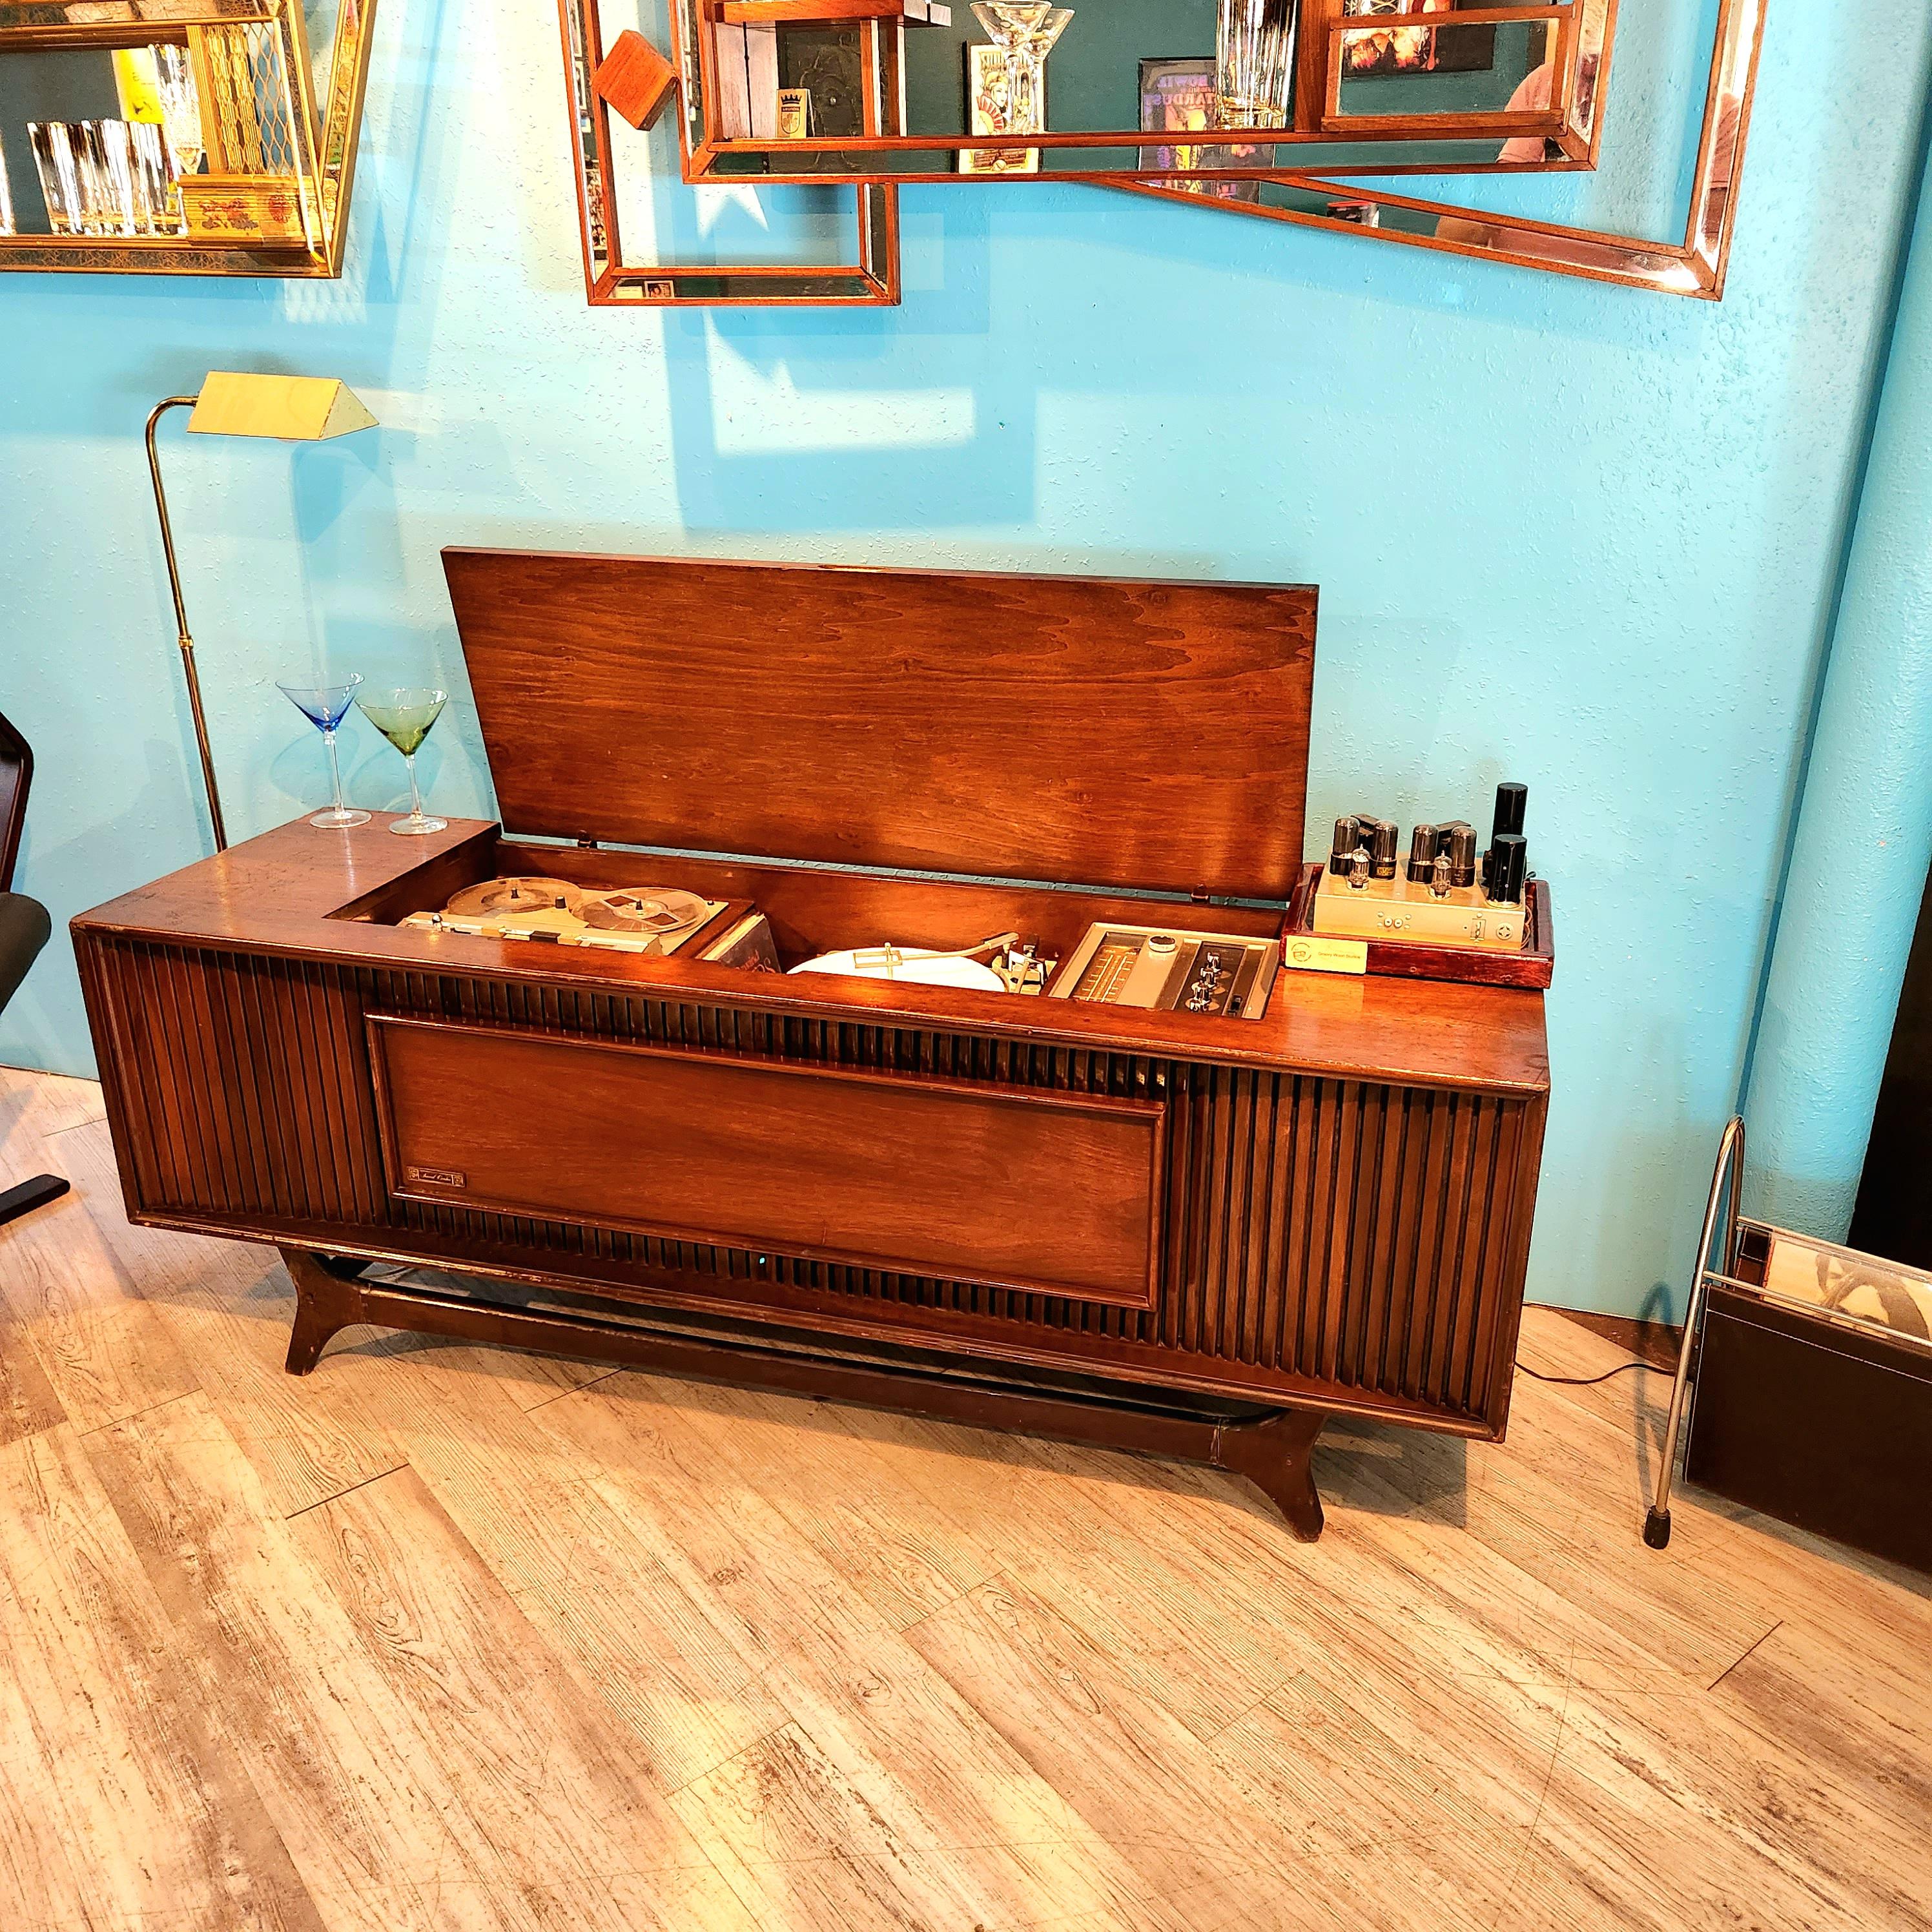 North American Mid-Century Modern Stereo Console Bar Ge Record Player Refurbed Bluetooth